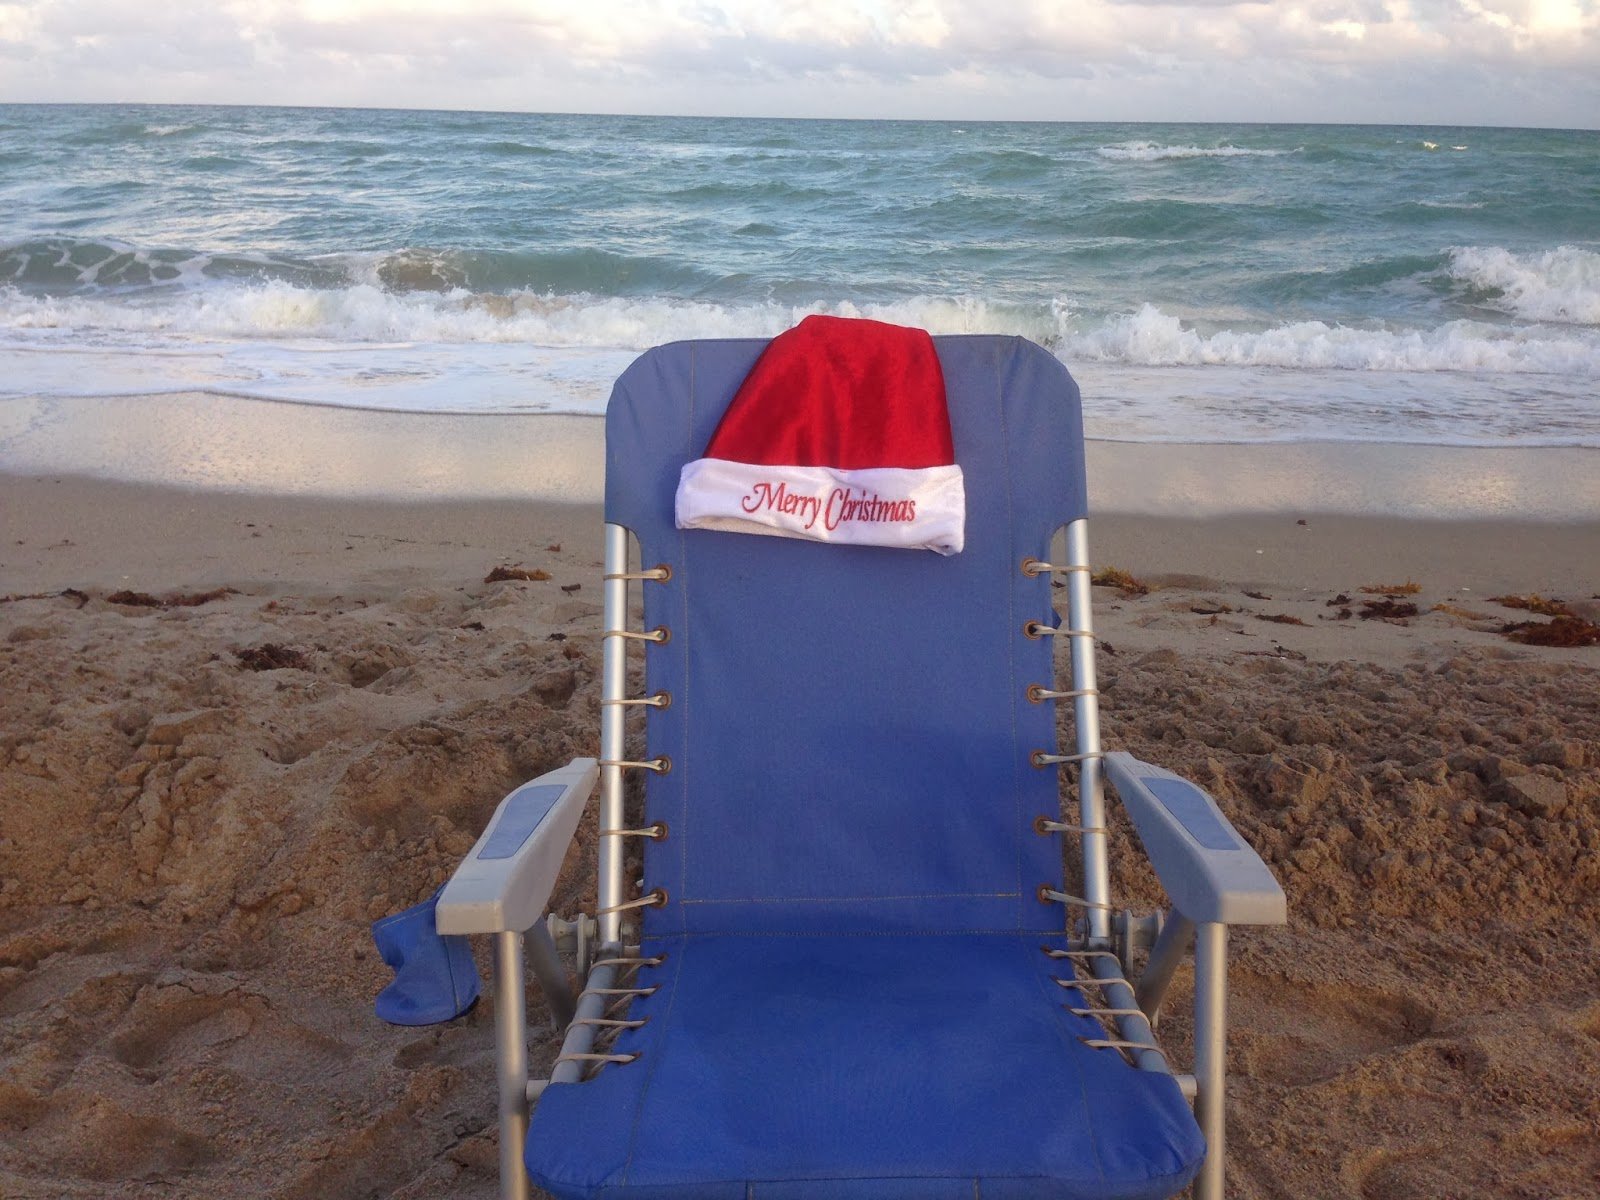 betterplace to have a Christmas party than on a beach in South Florida